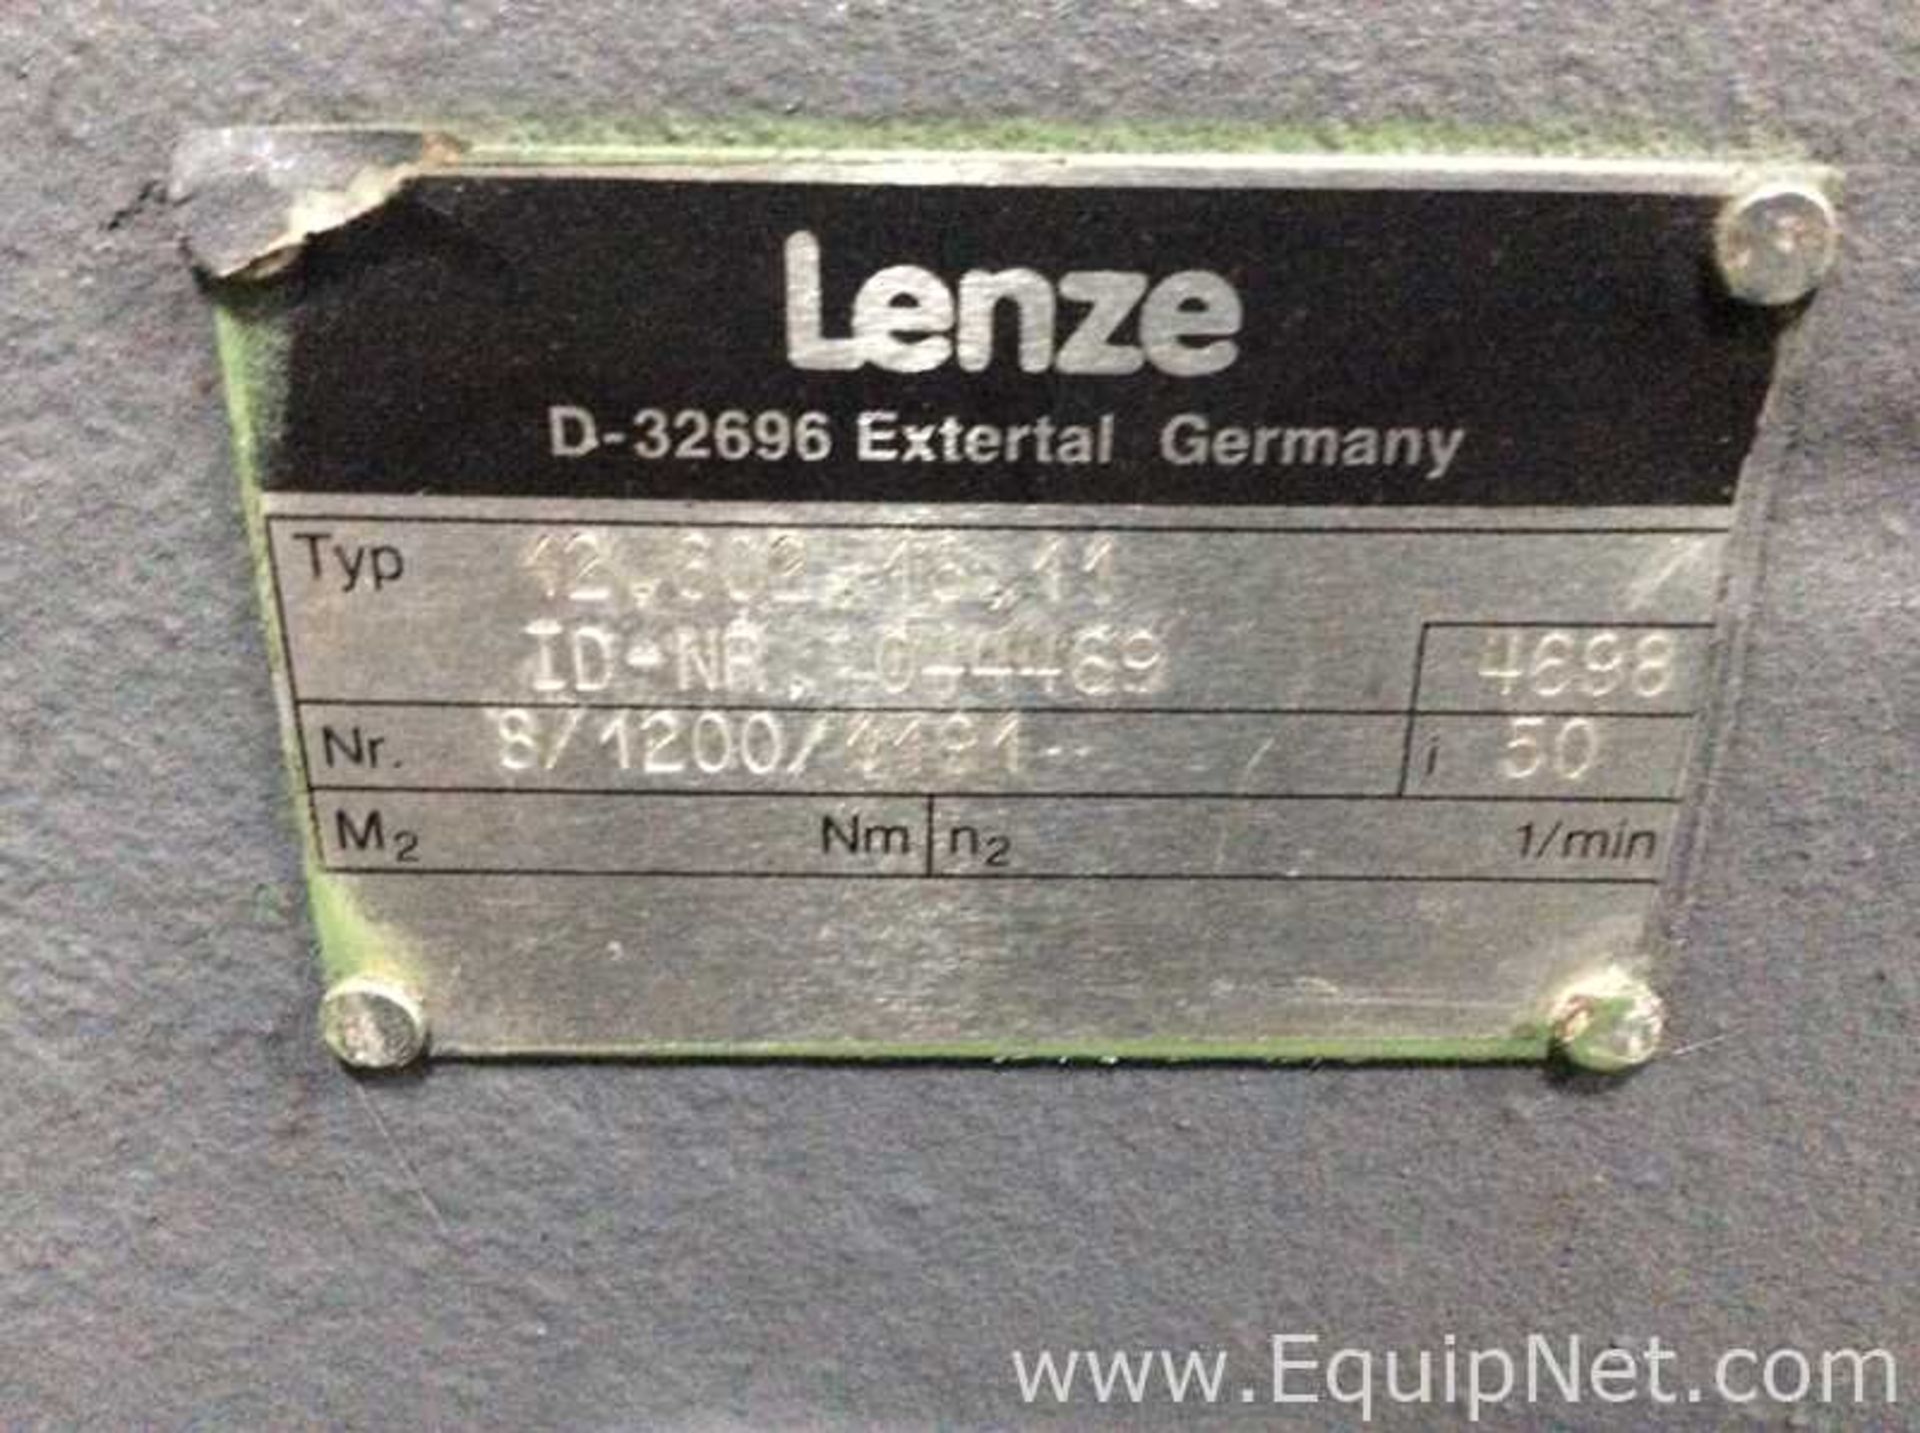 Lenze 12.206 electric Motor With Drive Box - Image 3 of 8